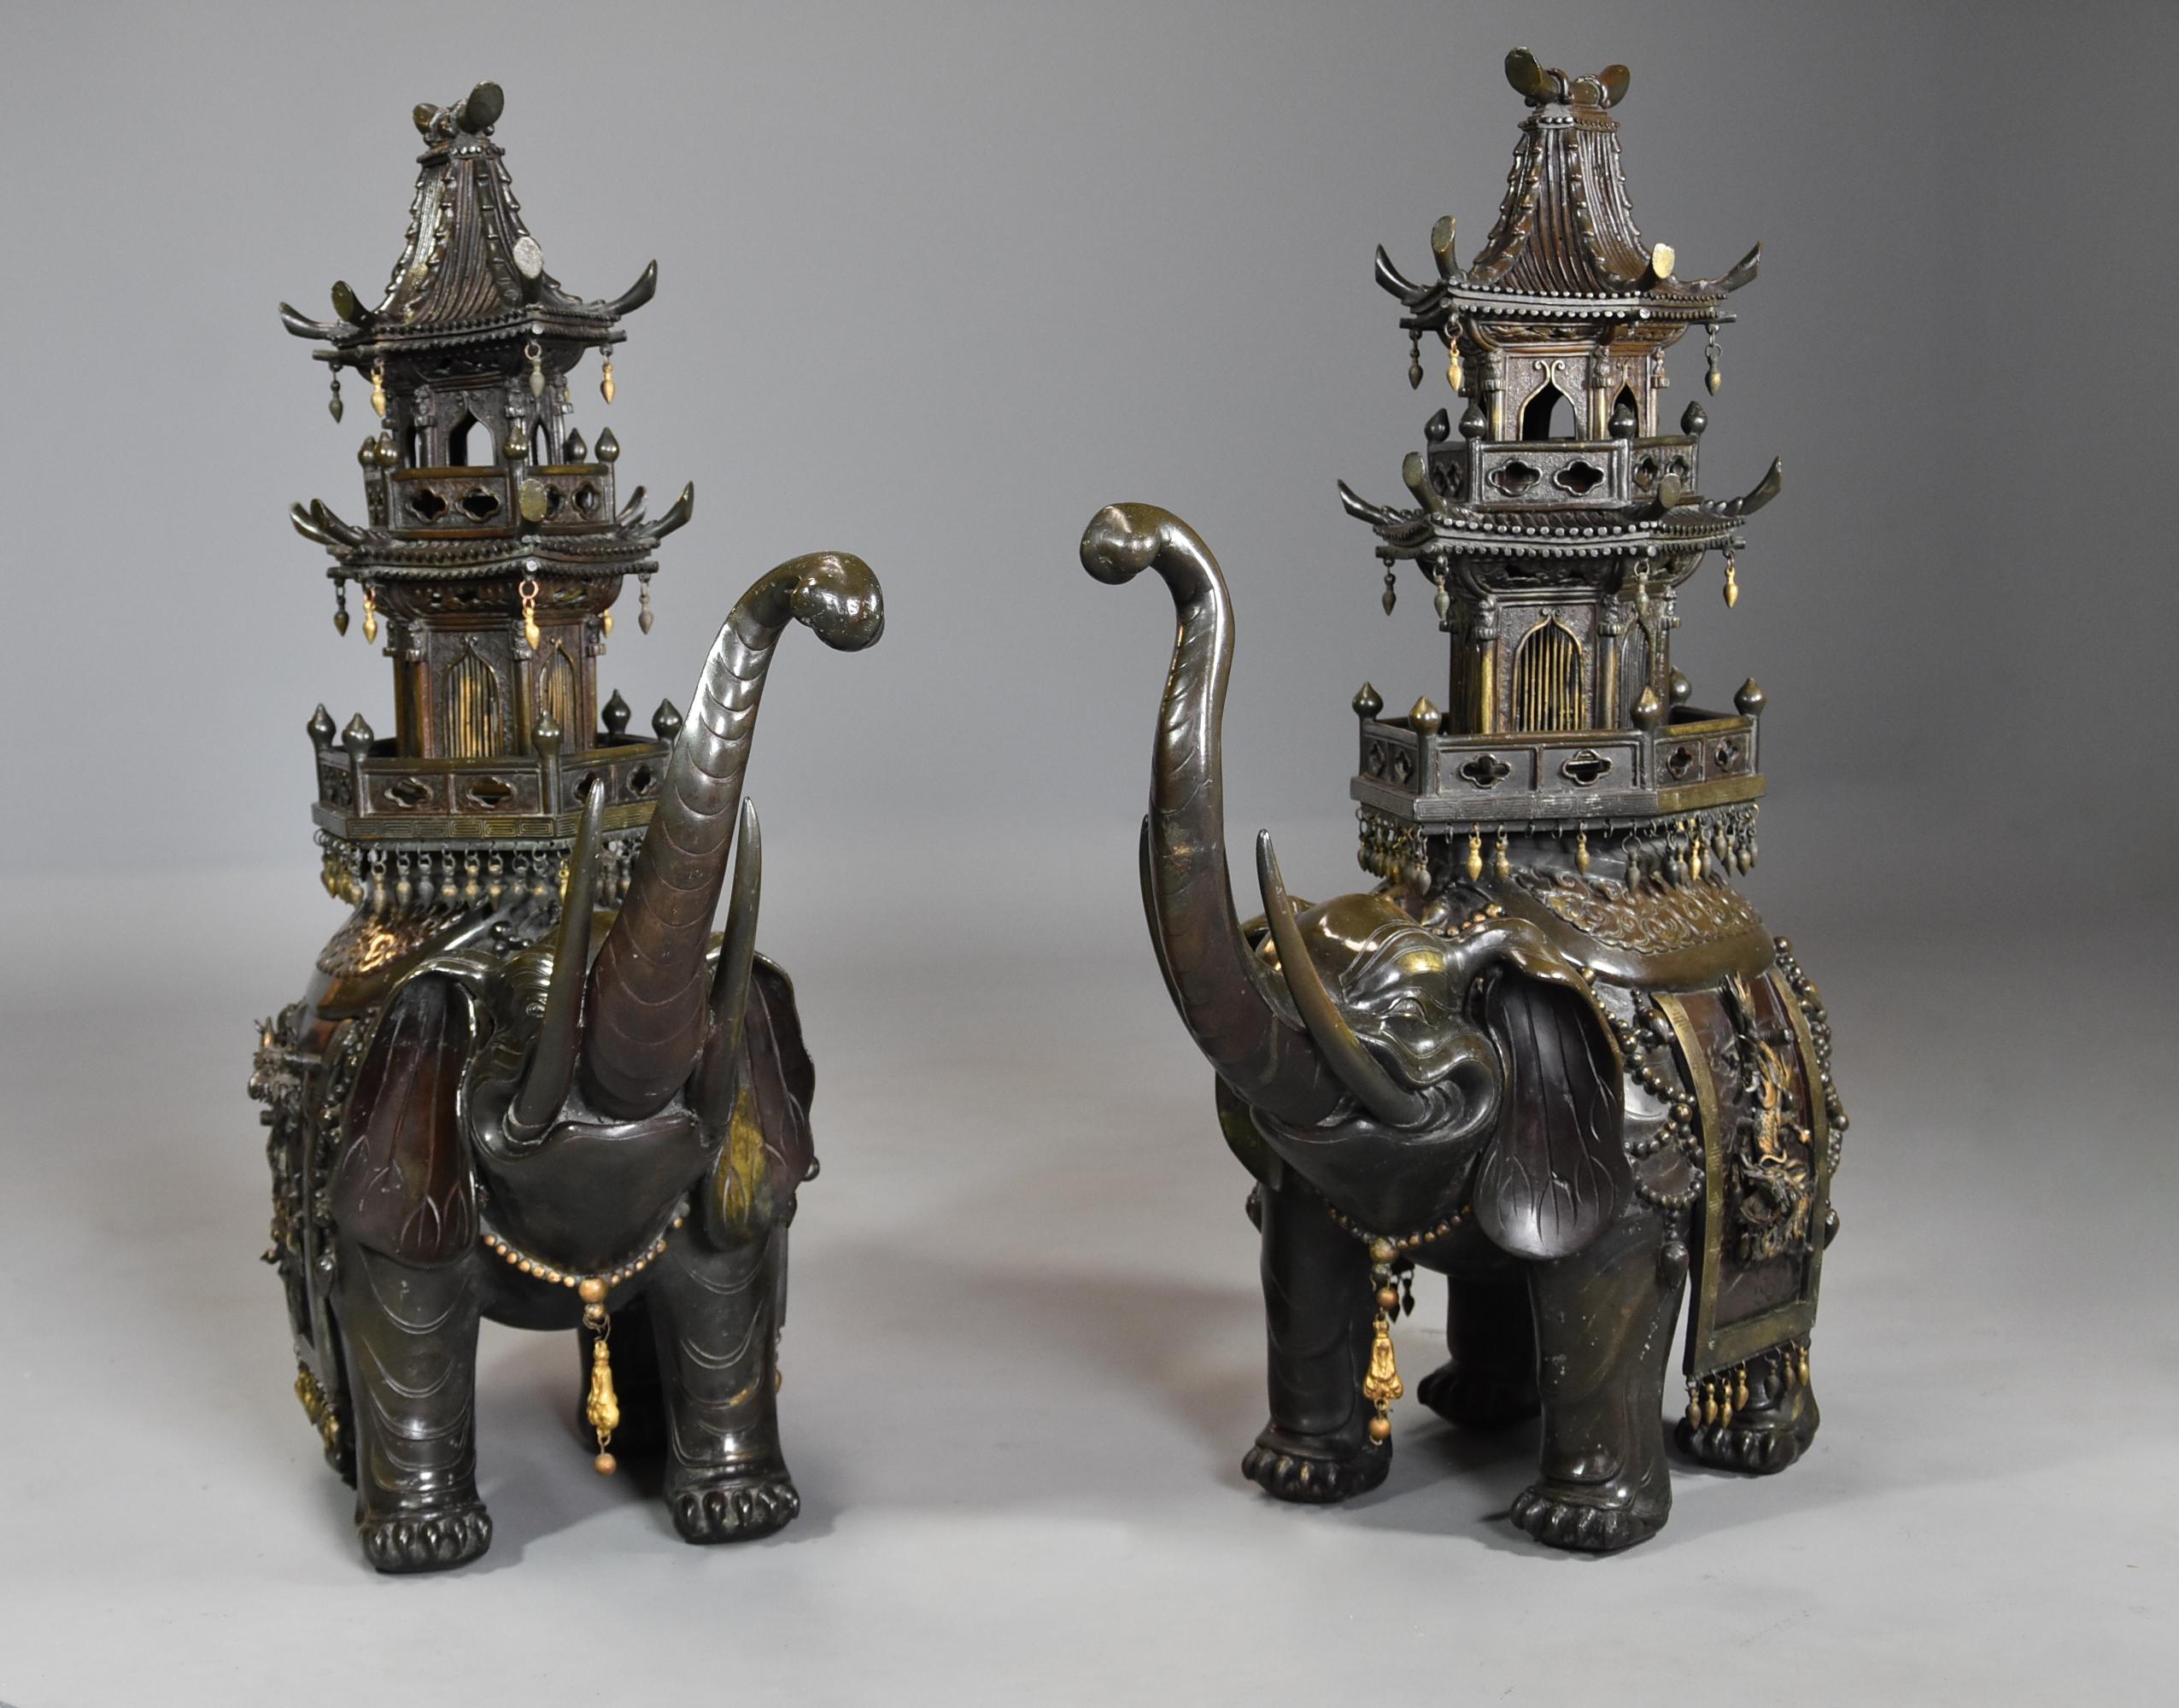 Pair of Large 19th Century Japanese Meiji Bronze Elephant Incense Burners For Sale 1